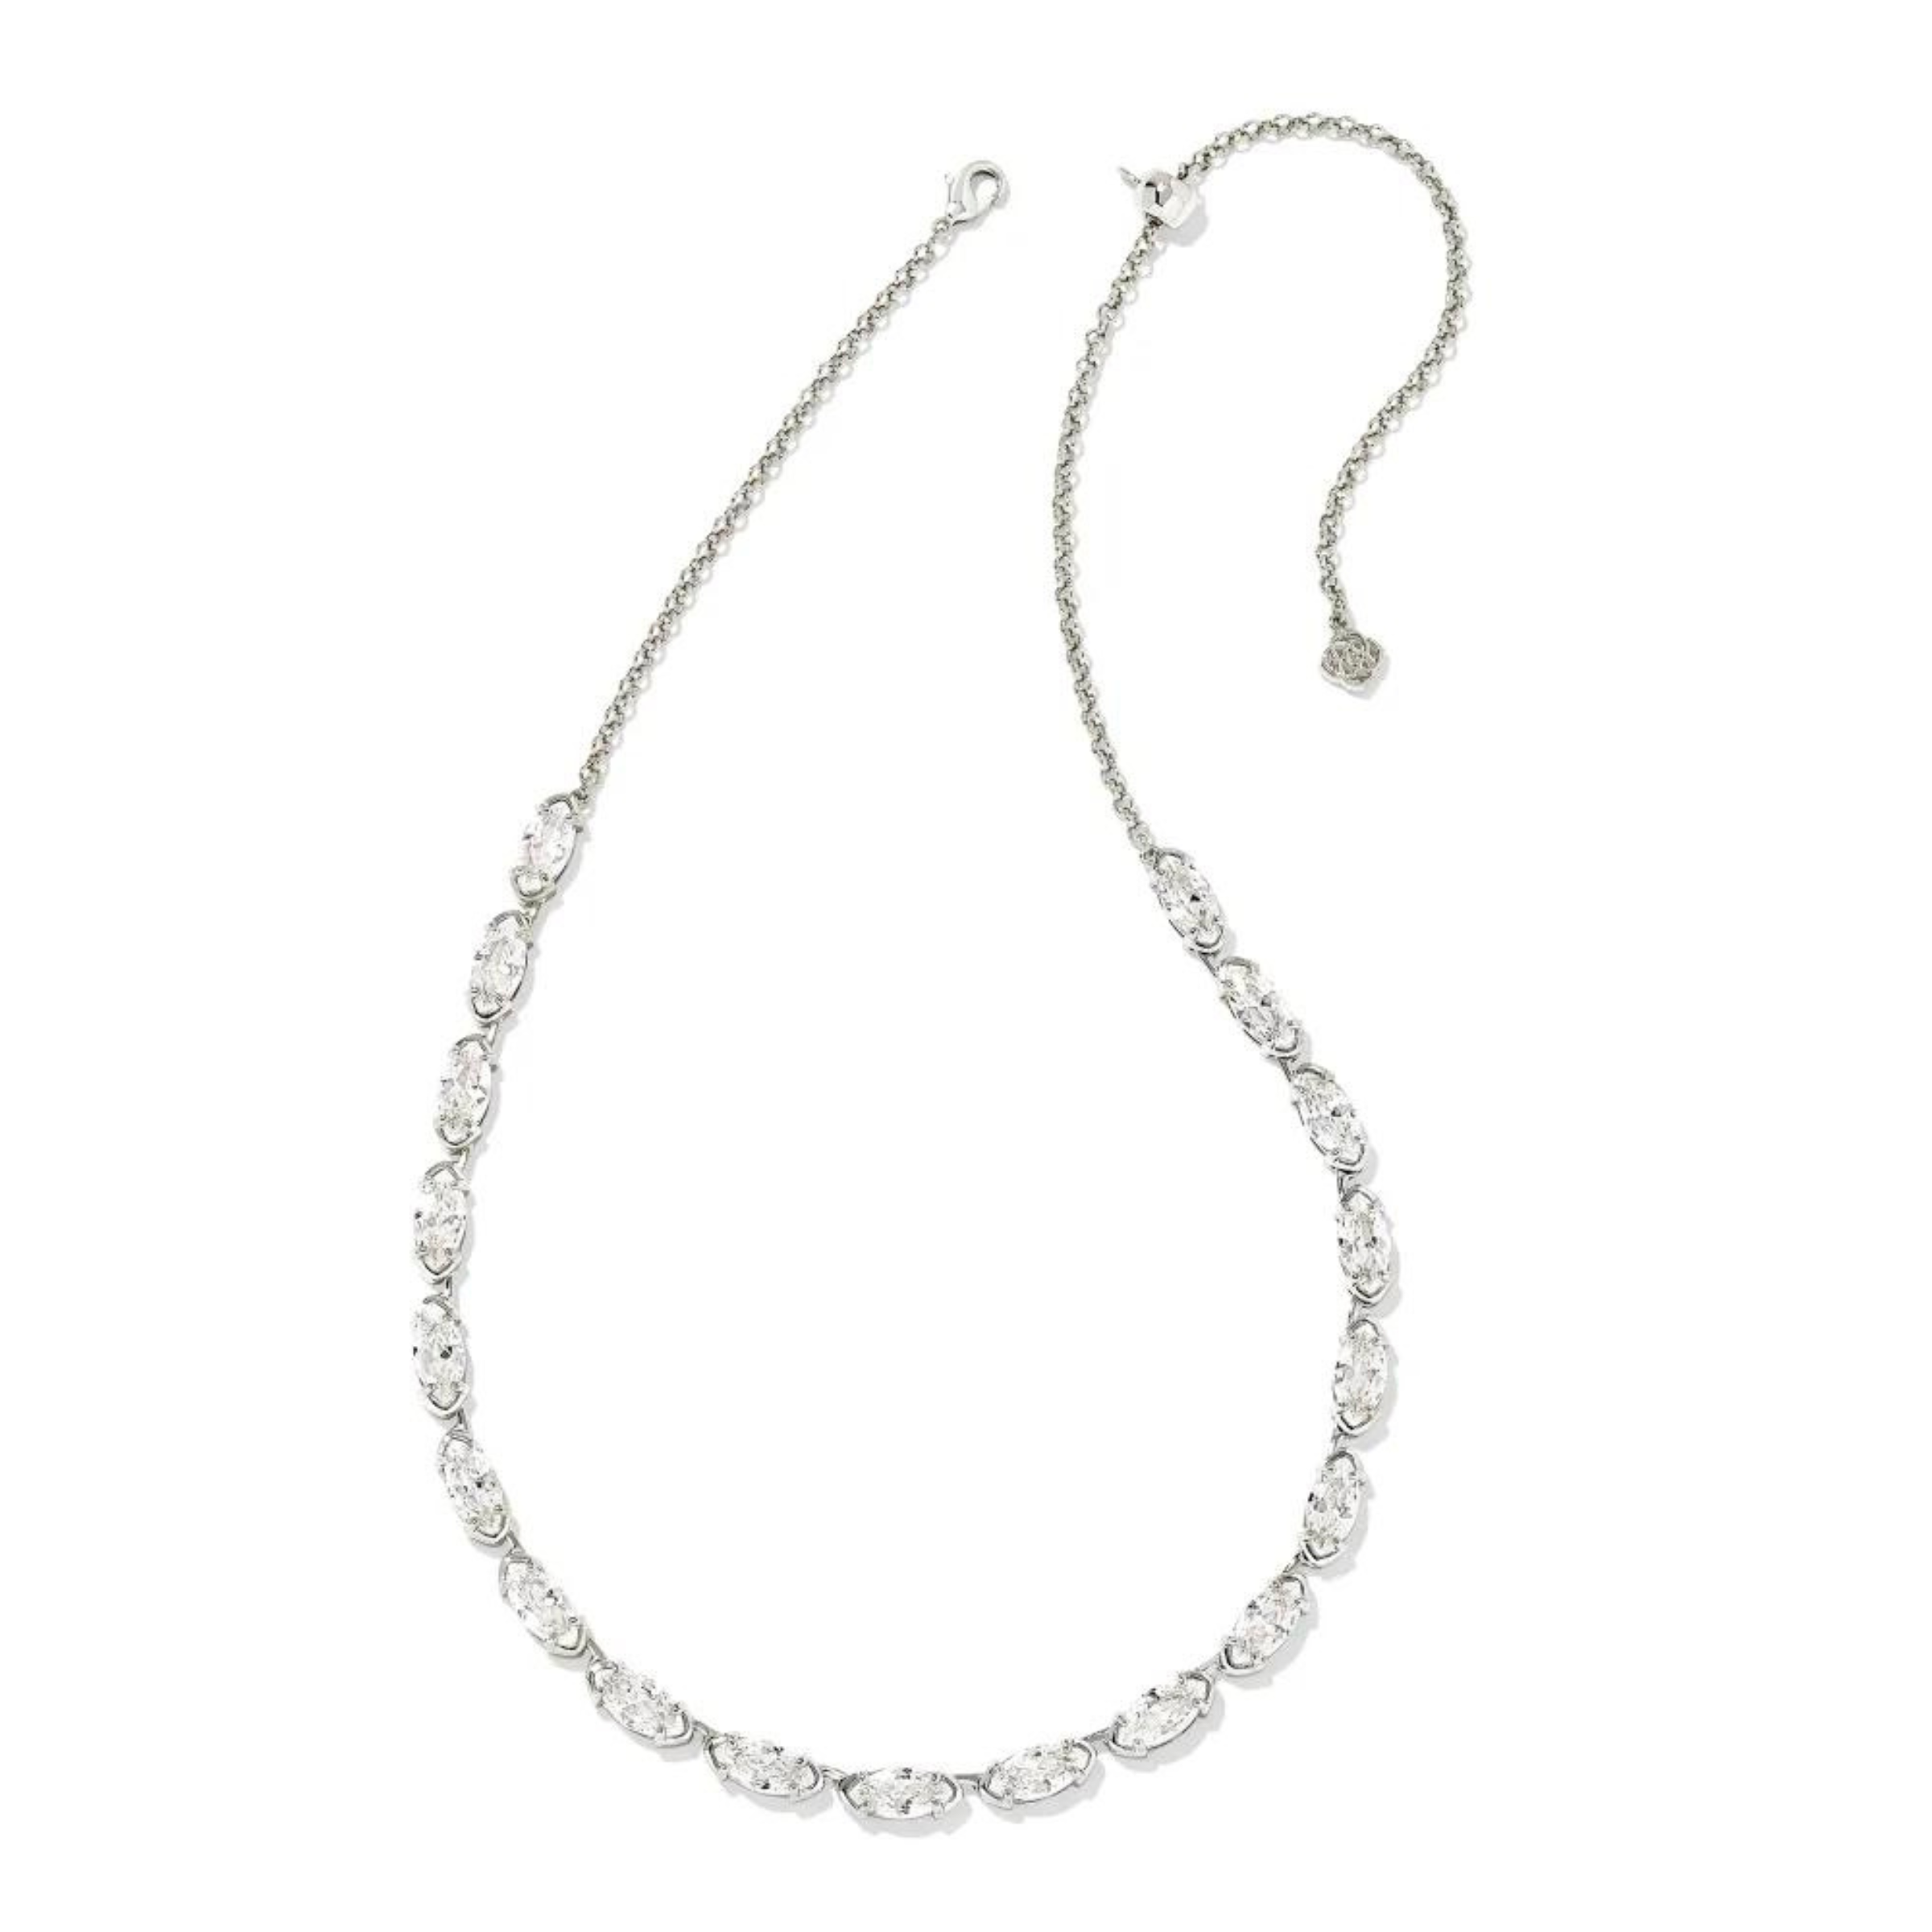 Silver tennis necklace with clear crystals. This necklace is pictured on a white background. 